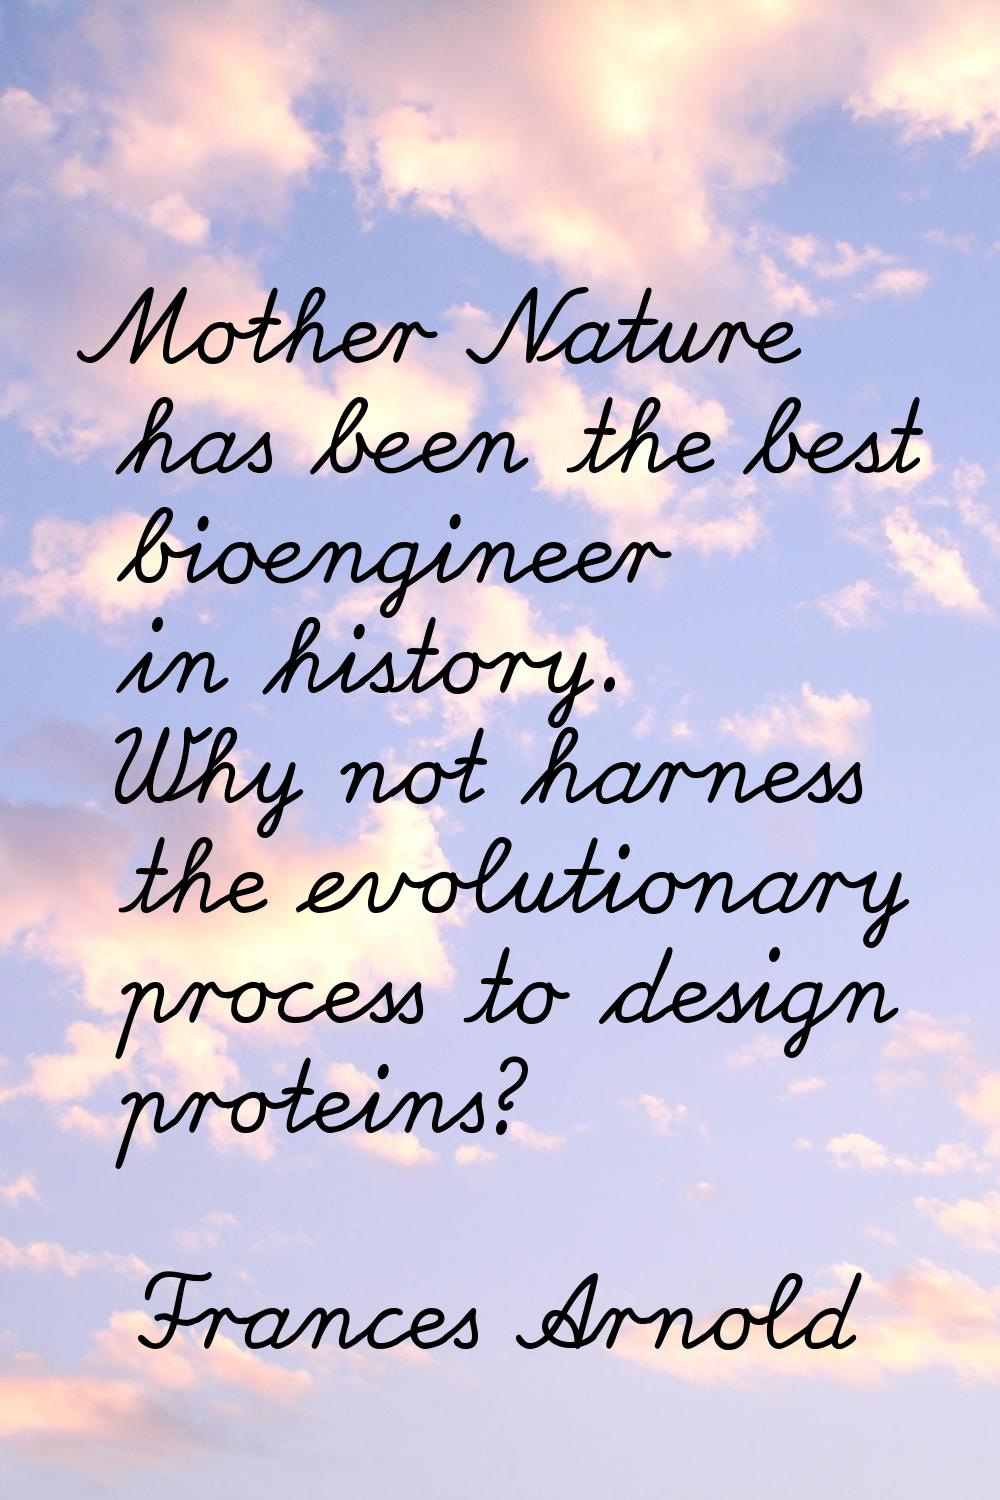 Mother Nature has been the best bioengineer in history. Why not harness the evolutionary process to